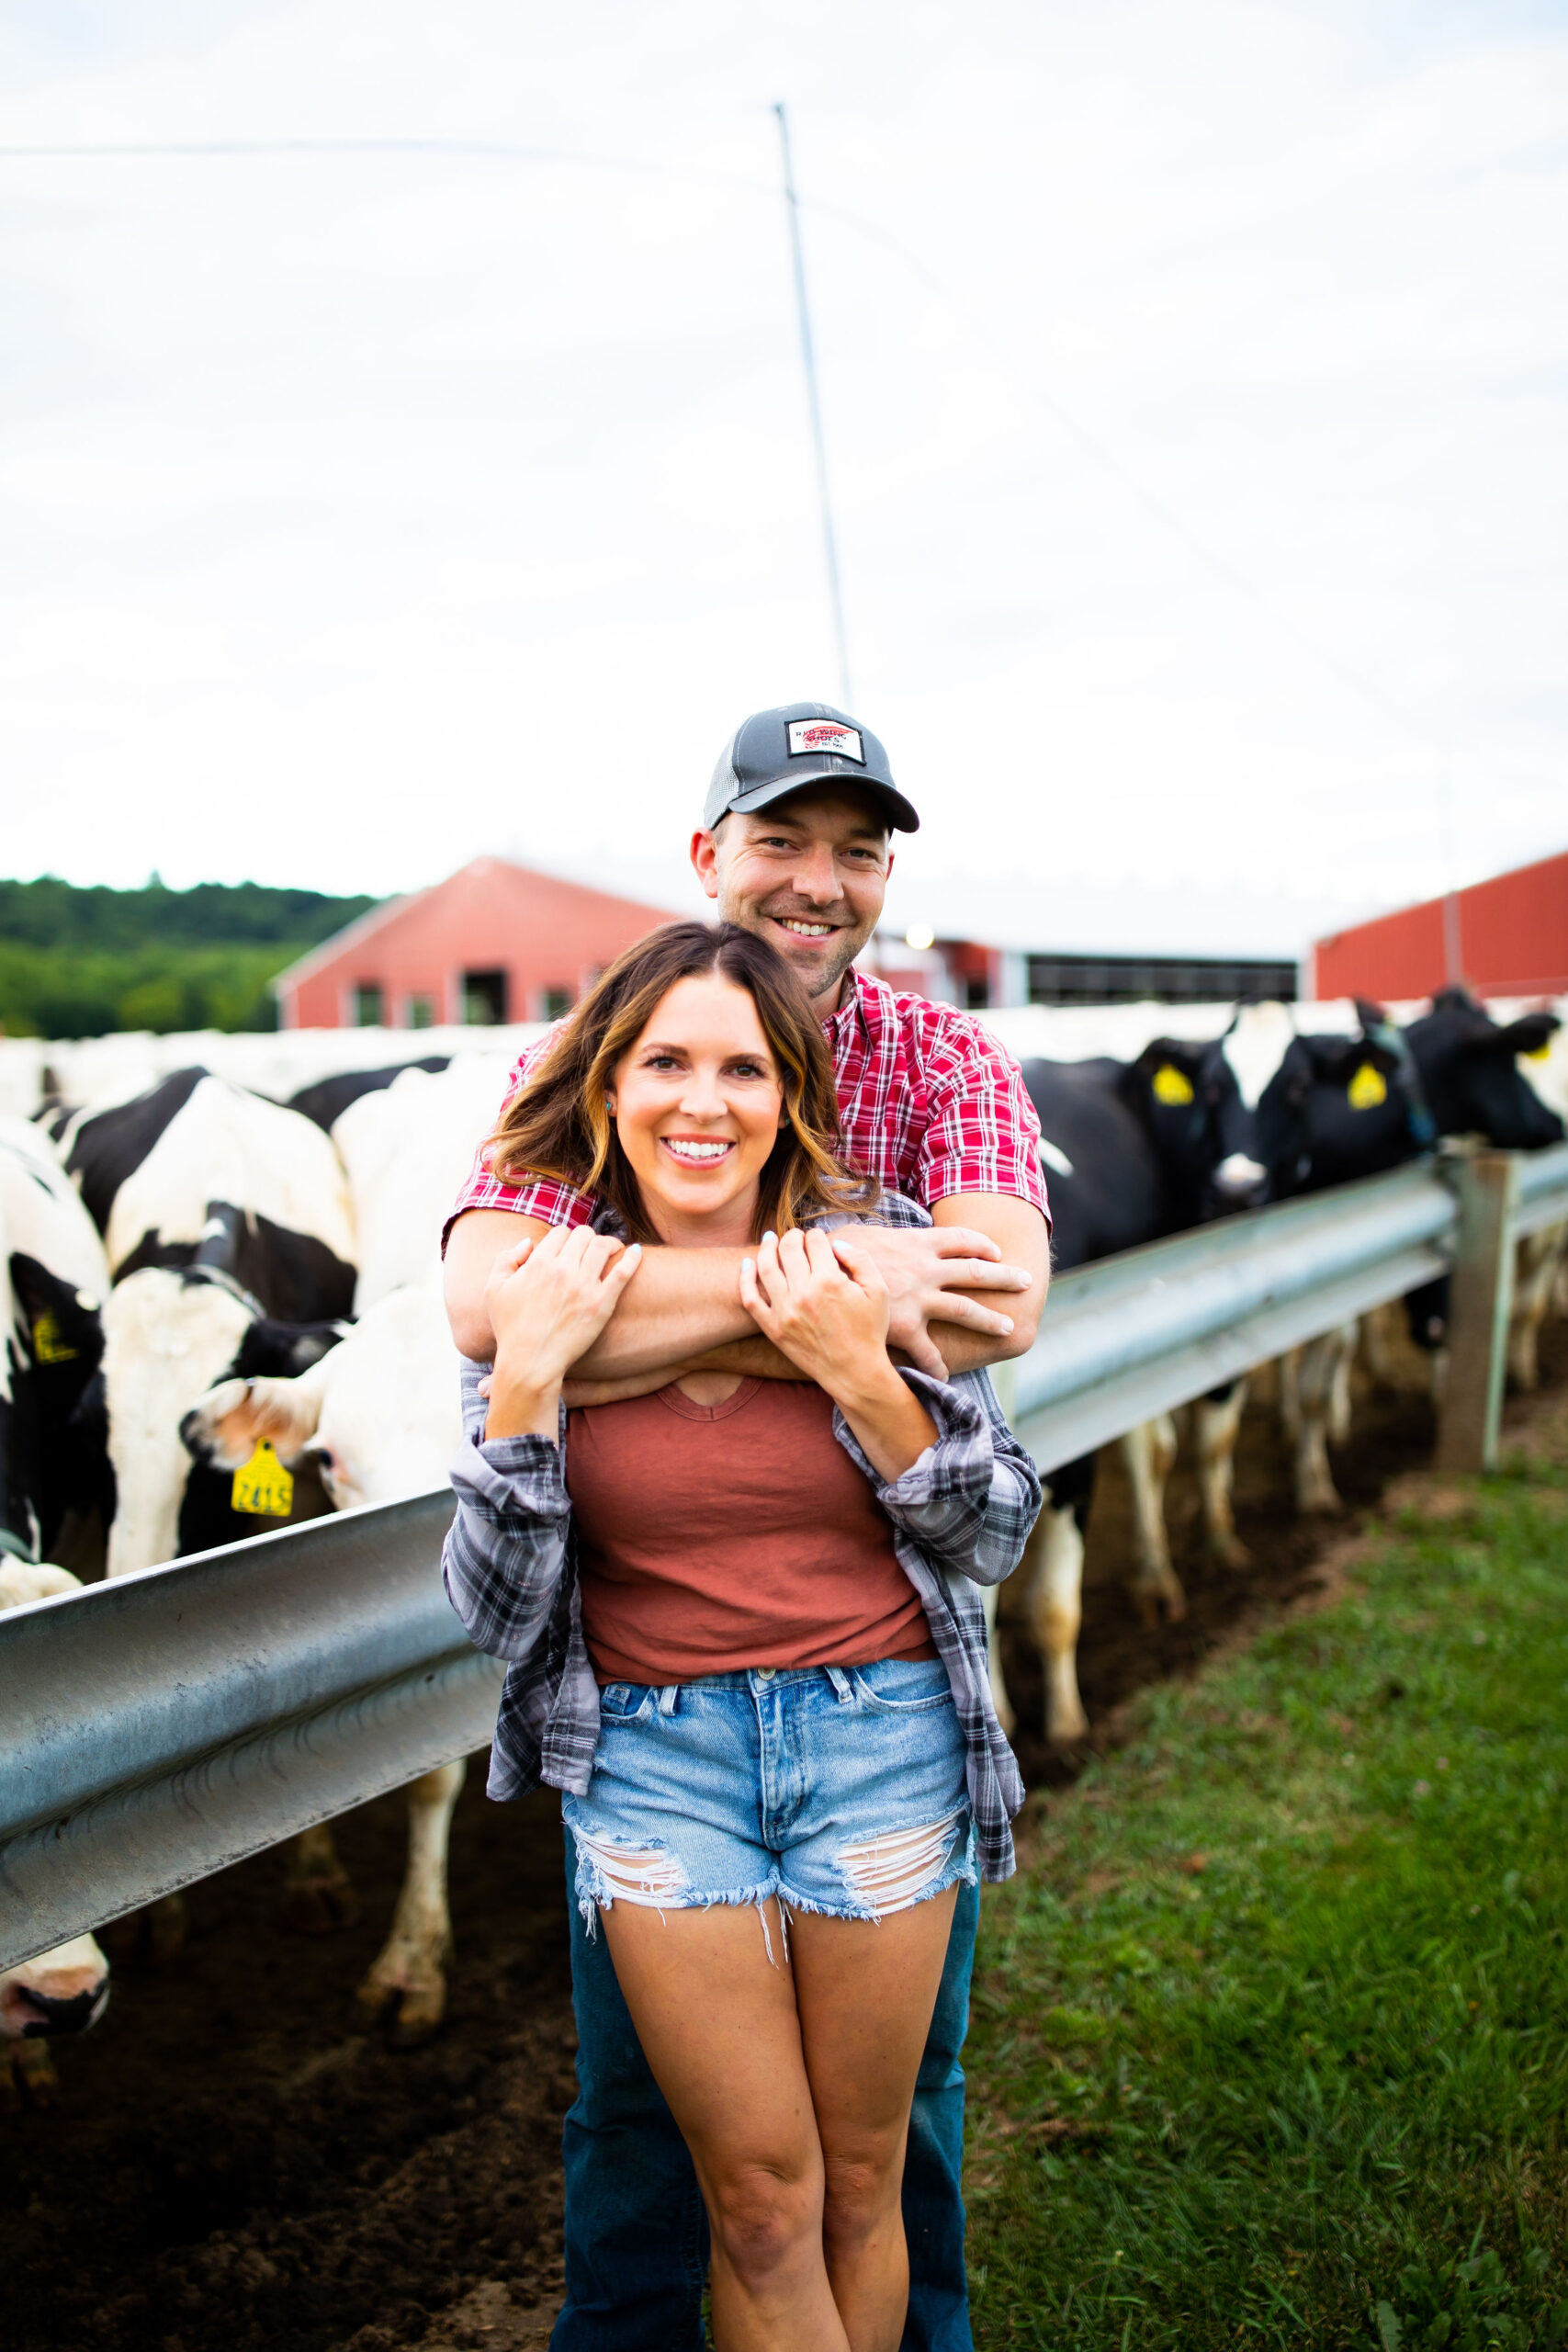 Wisconsin dairy farm couple in front of cows on the farm